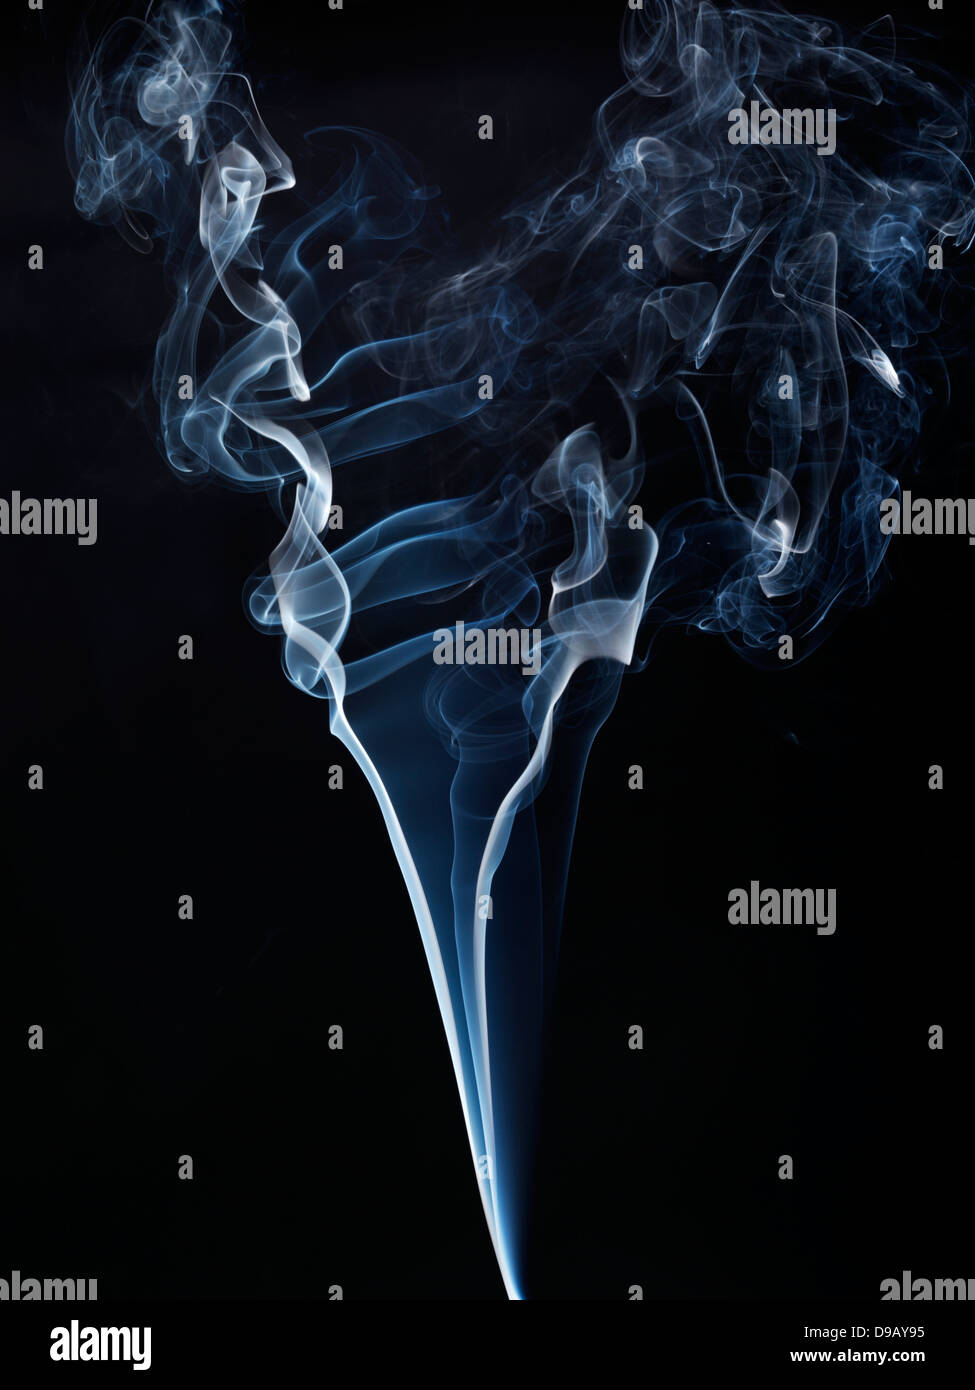 Cigarette and cigar smoke against black background, close up Stock Photo